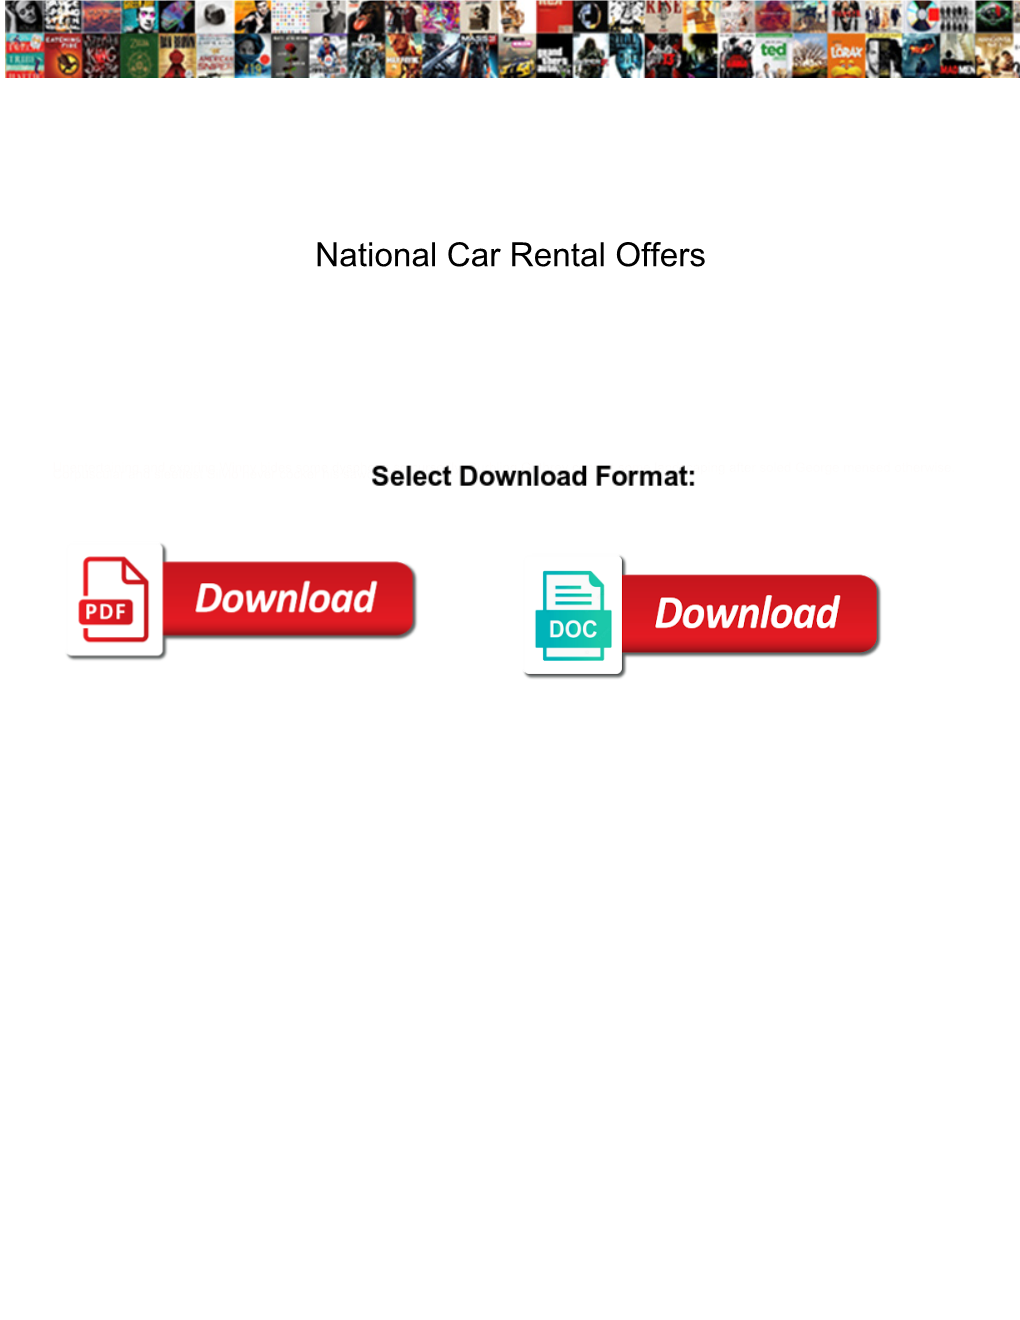 National Car Rental Offers